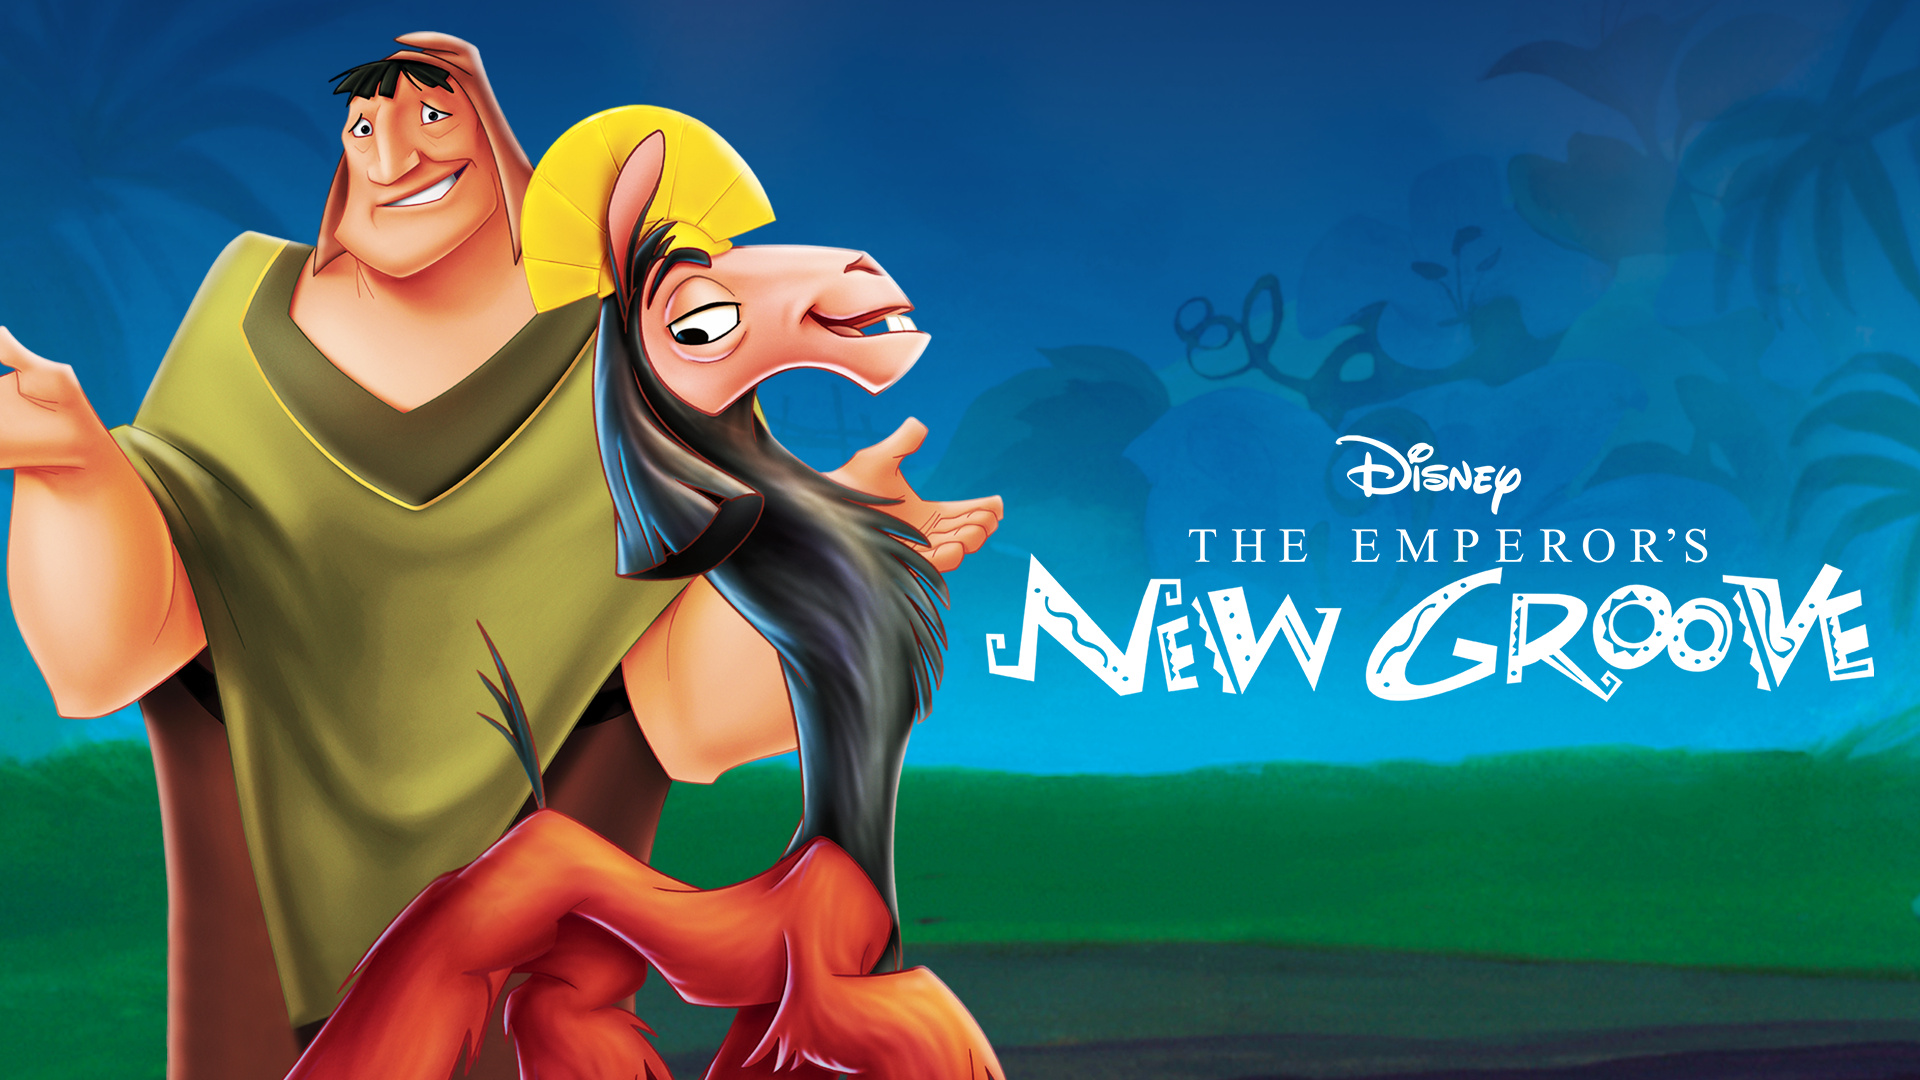 The Emperor's New Groove, 2000s movies, Disney+ collection, Nostalgic viewing, 1920x1080 Full HD Desktop